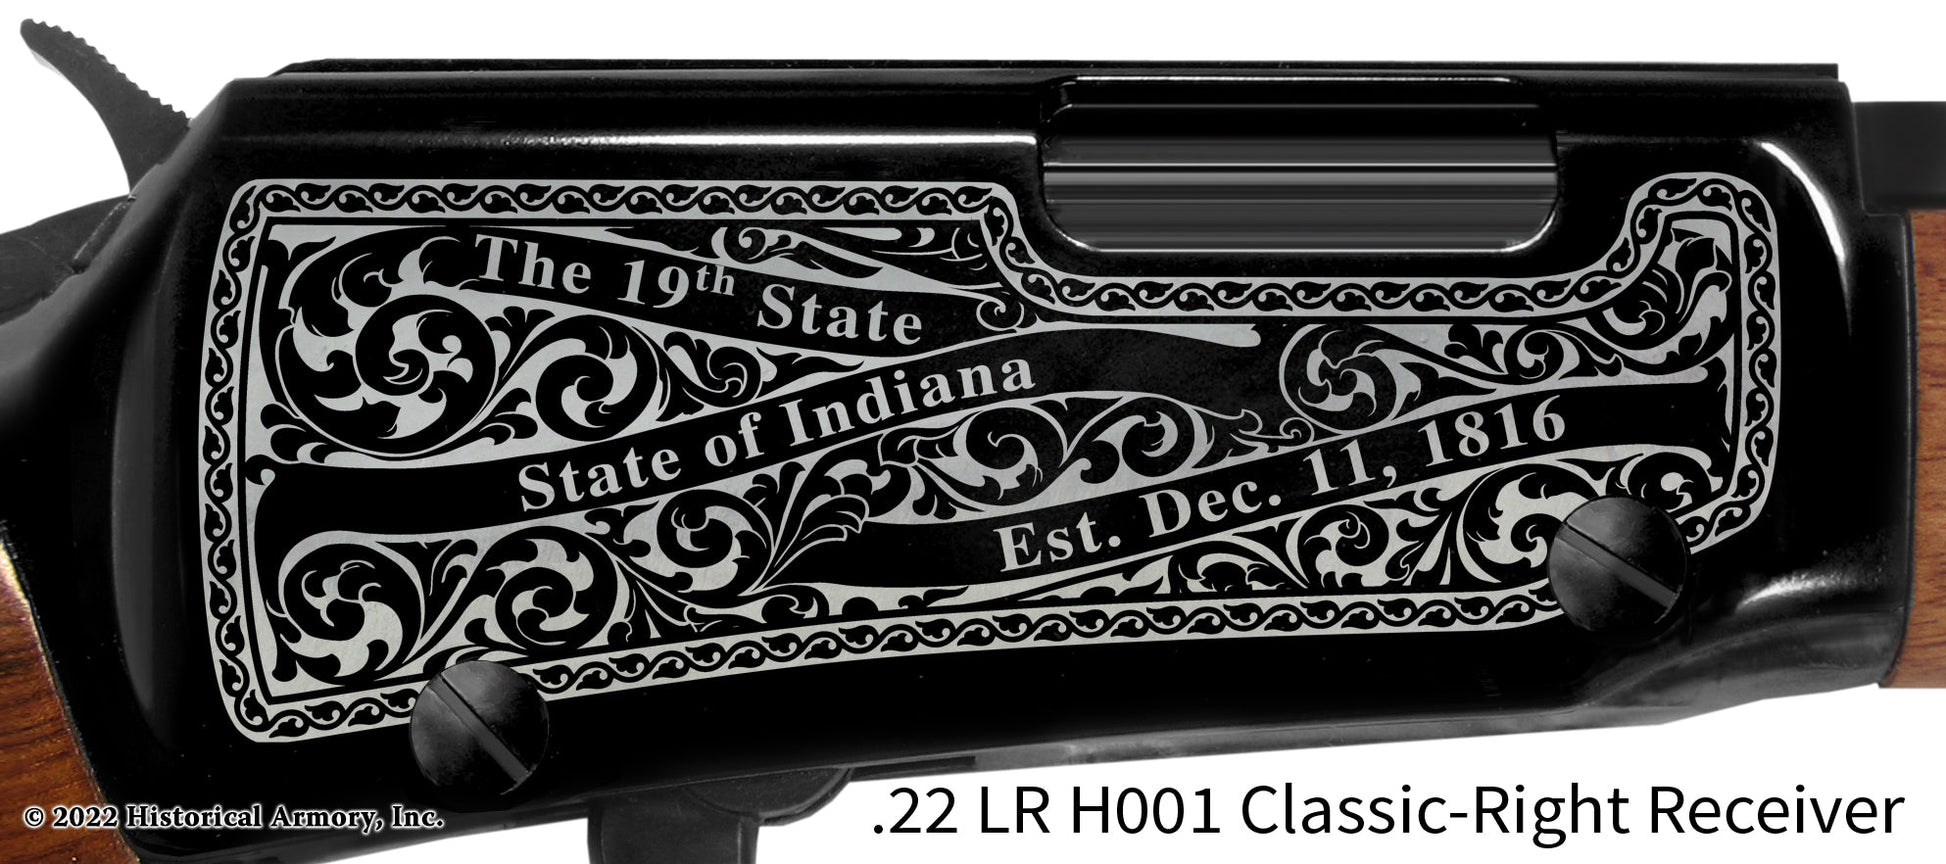 Blackford County Indiana Engraved Henry H001 Rifle